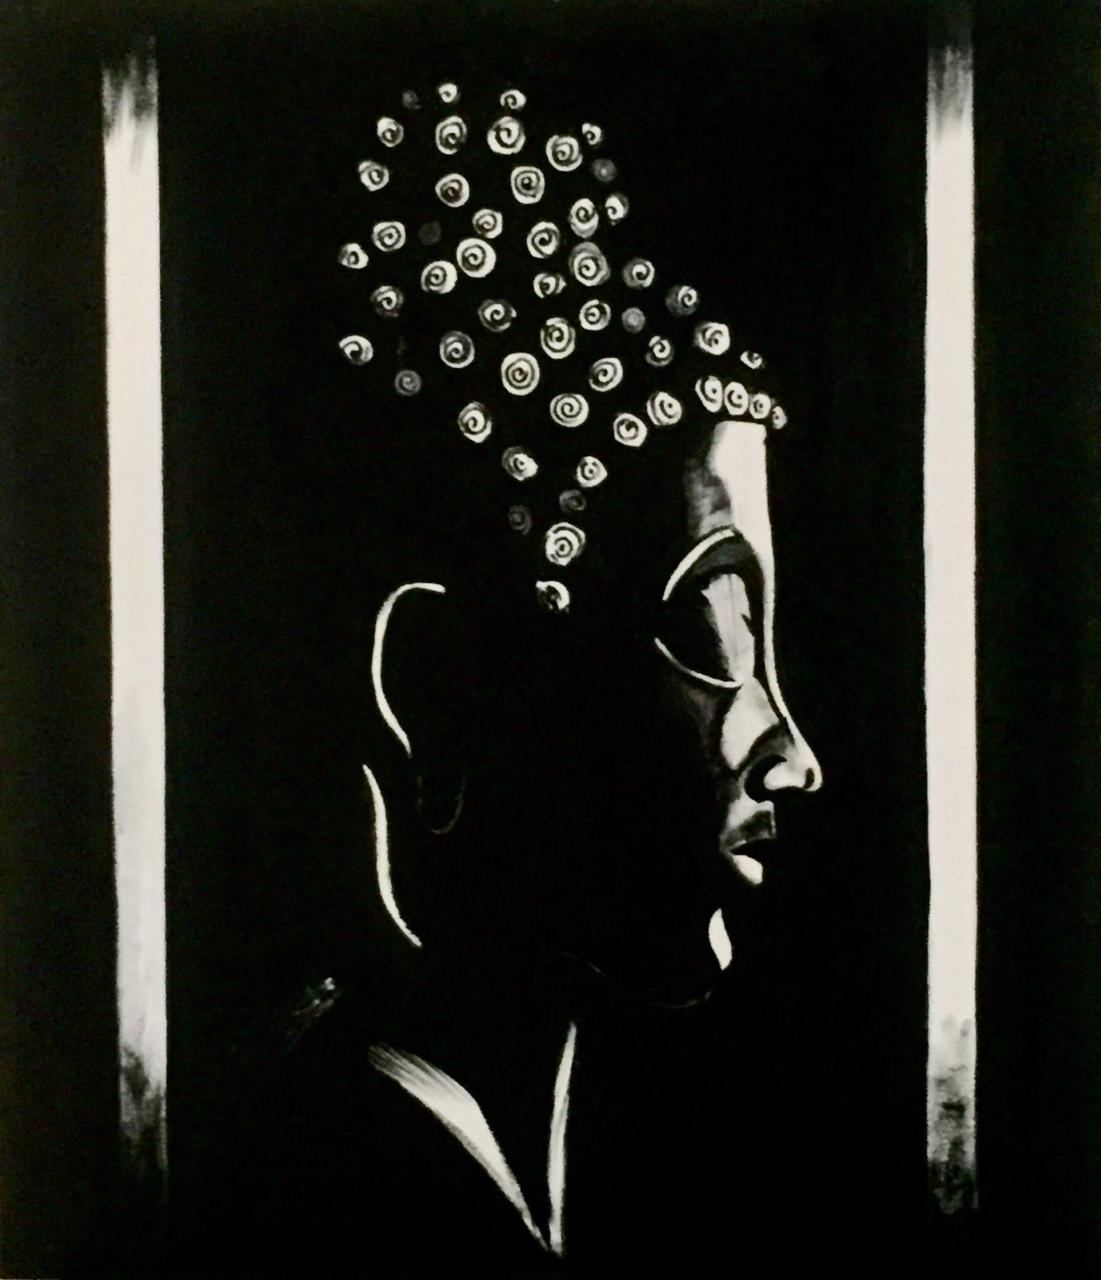 Buy Black and white Lord buddha art Painting at Lowest Price By ...